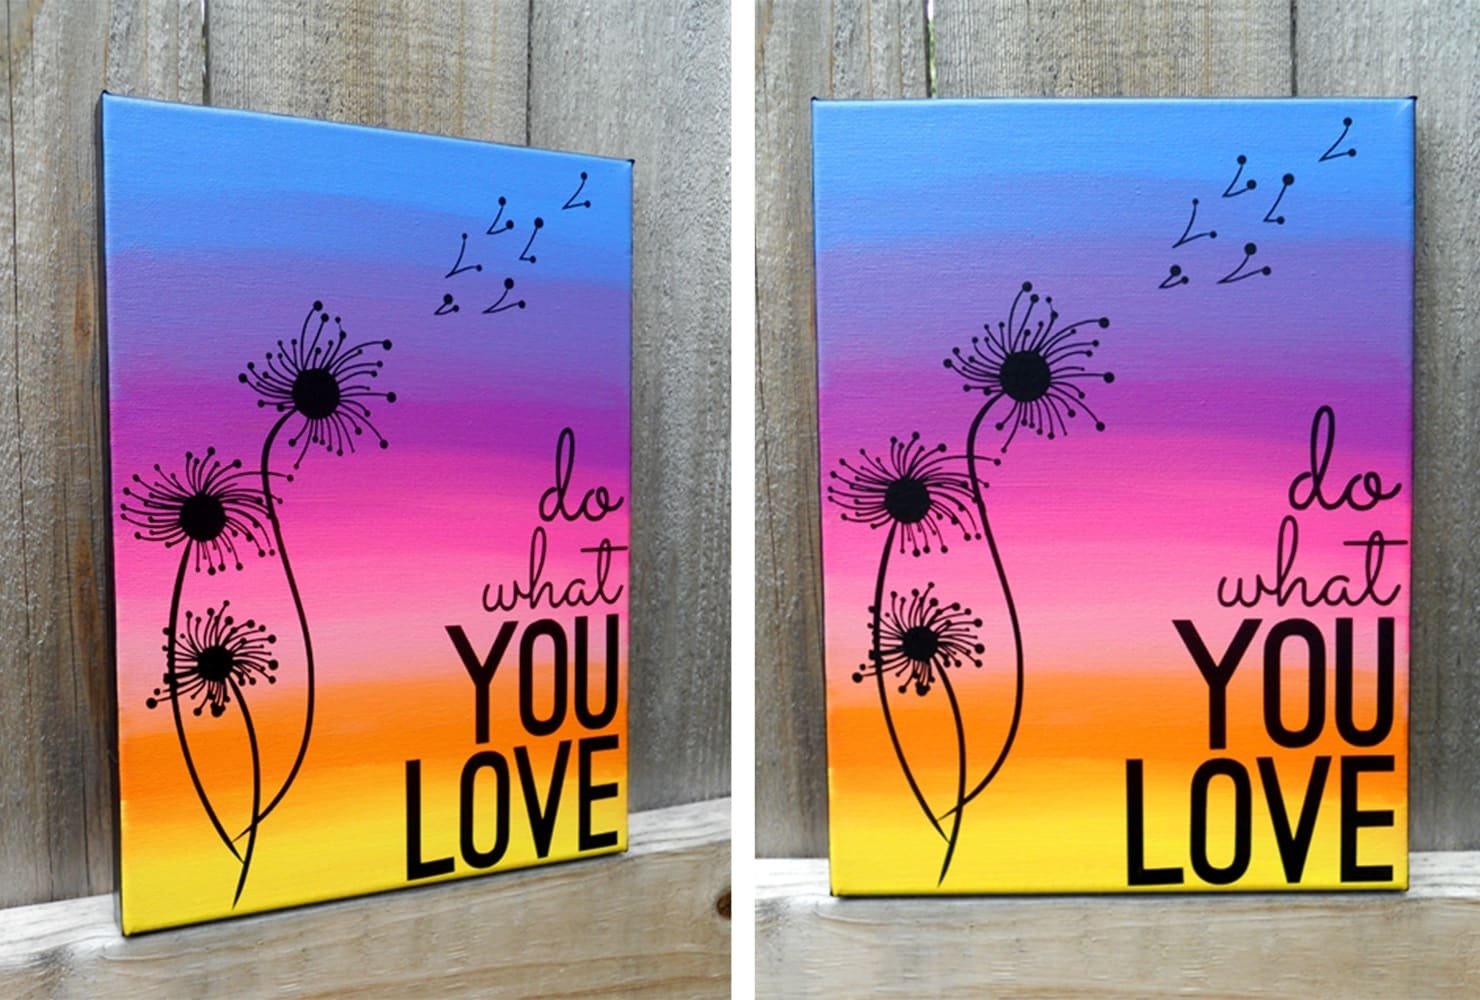 10 Stylish Ideas For Painting On Canvas 39 beautiful diy canvas painting ideas for your home shutterfly 2022